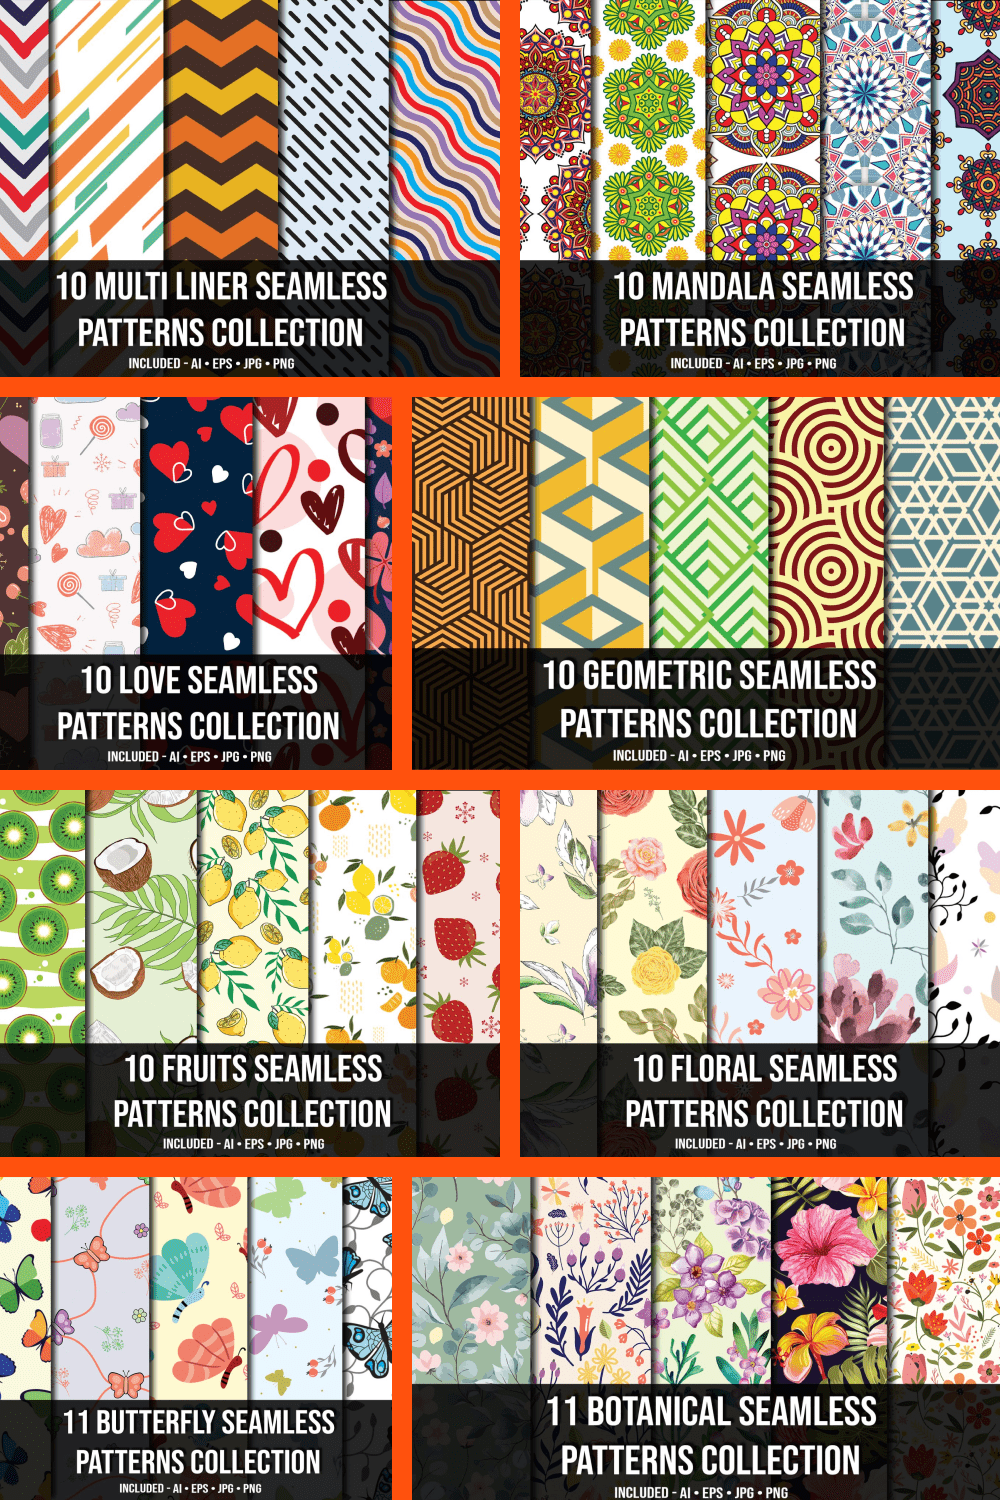 Big collection of patterns with different prints.